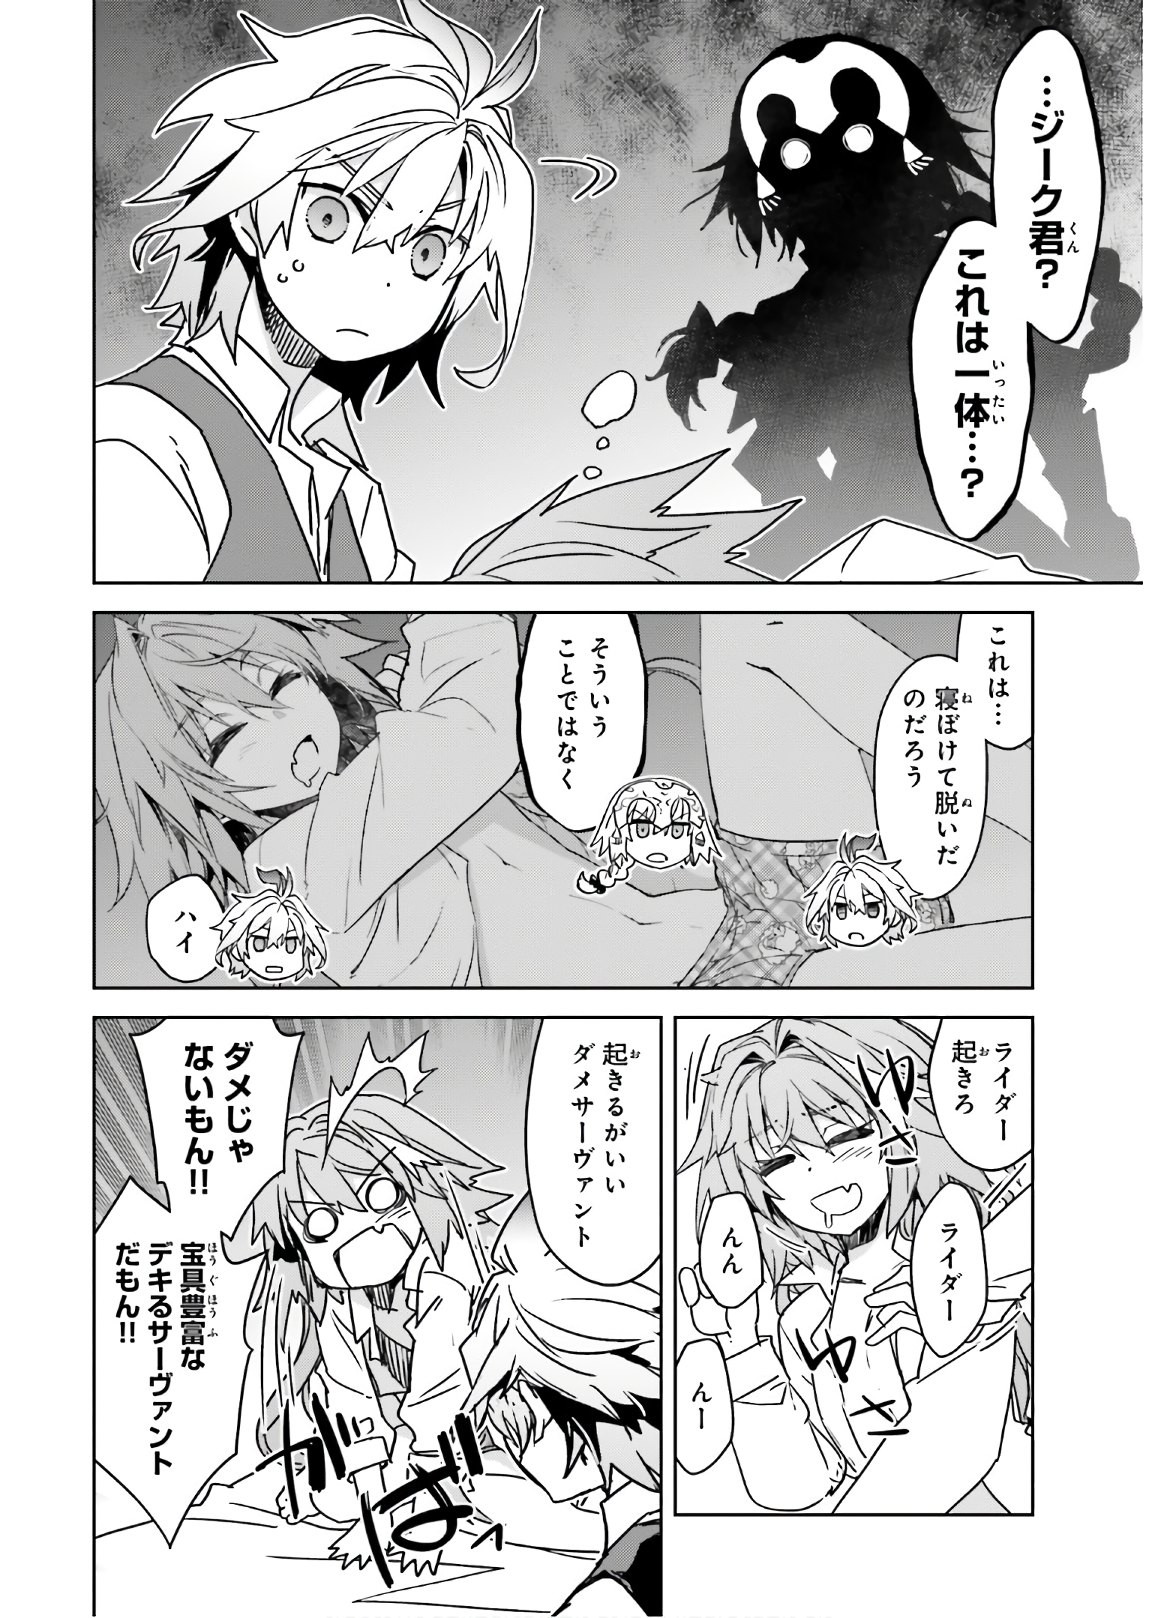 Fate-Apocrypha - Chapter 43 - Page 4